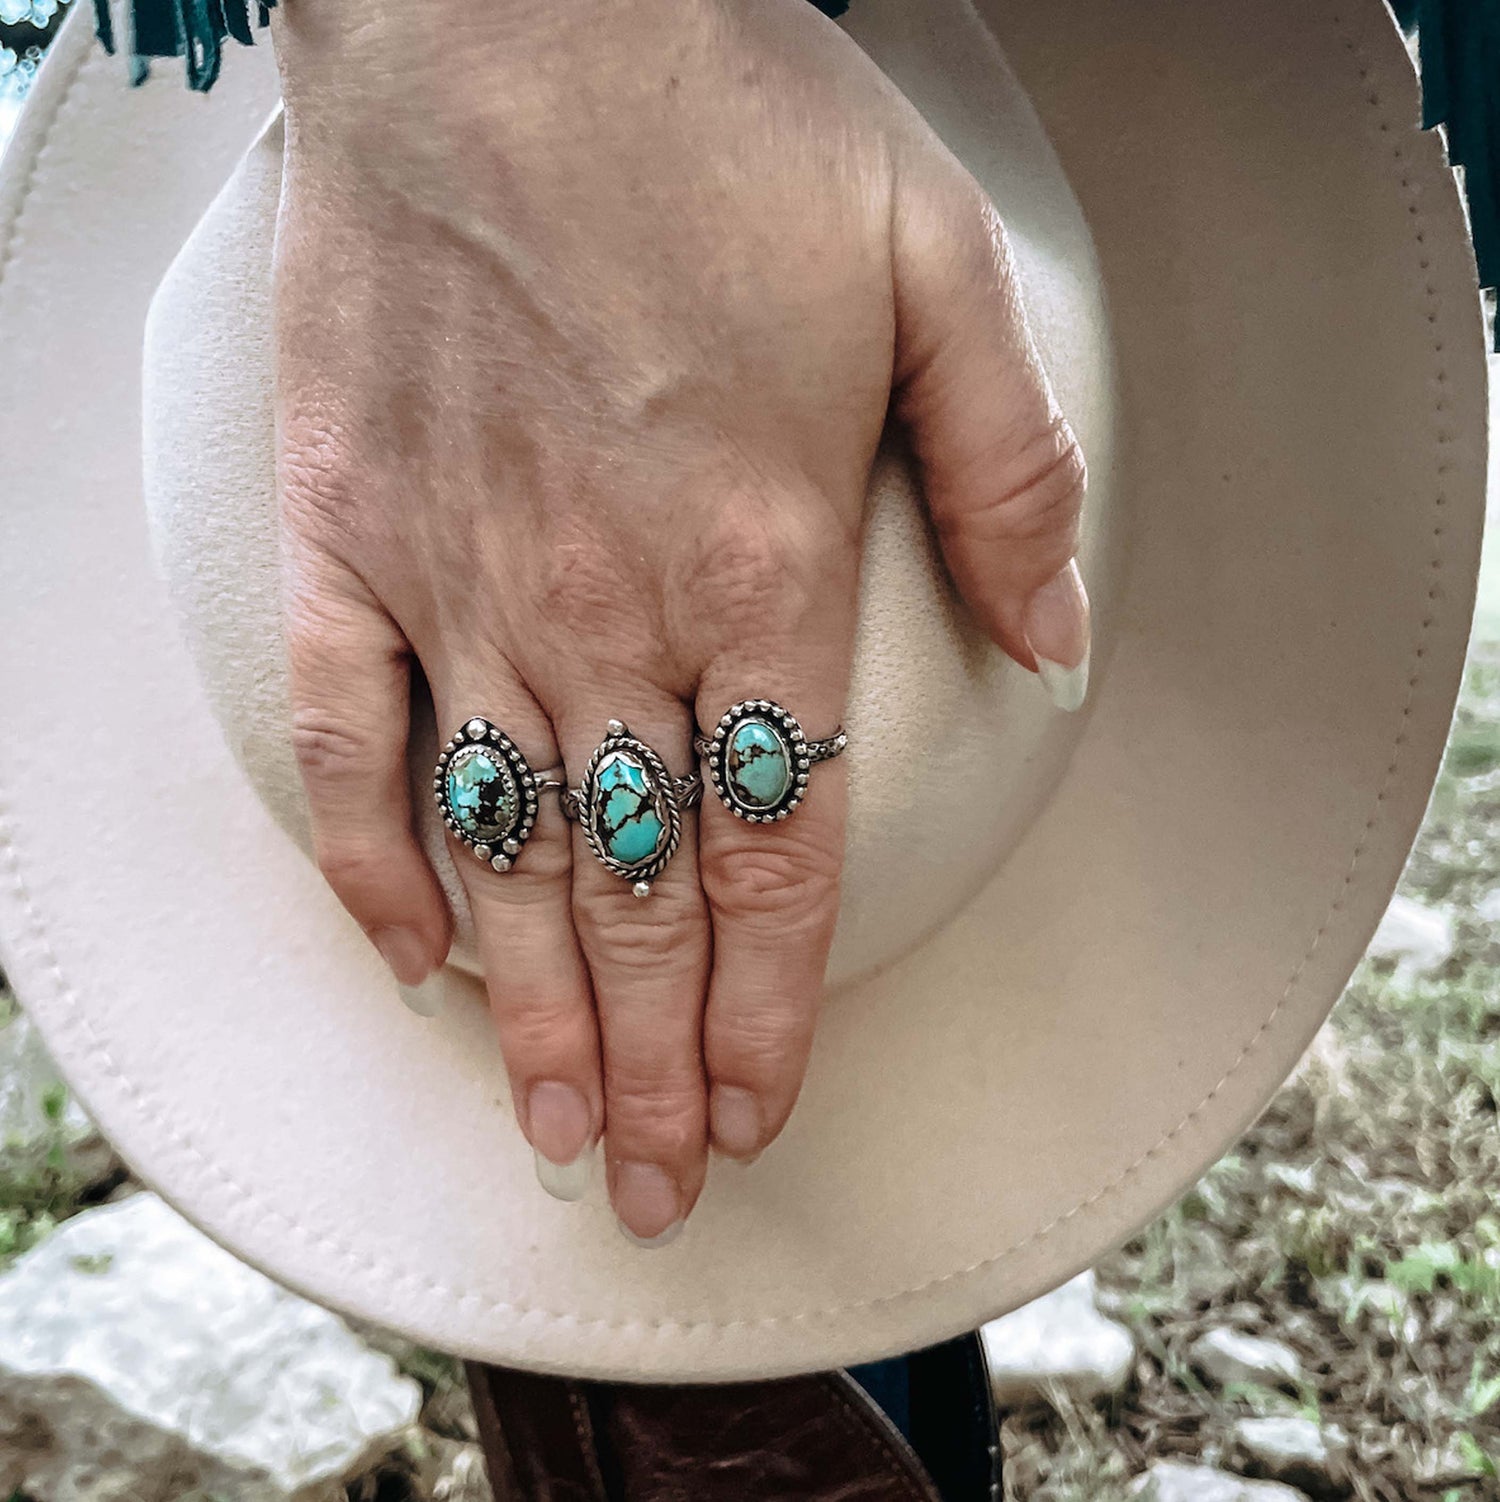 Three oval Golden Hills Turquoise rings on hand holding cream colored western hat.